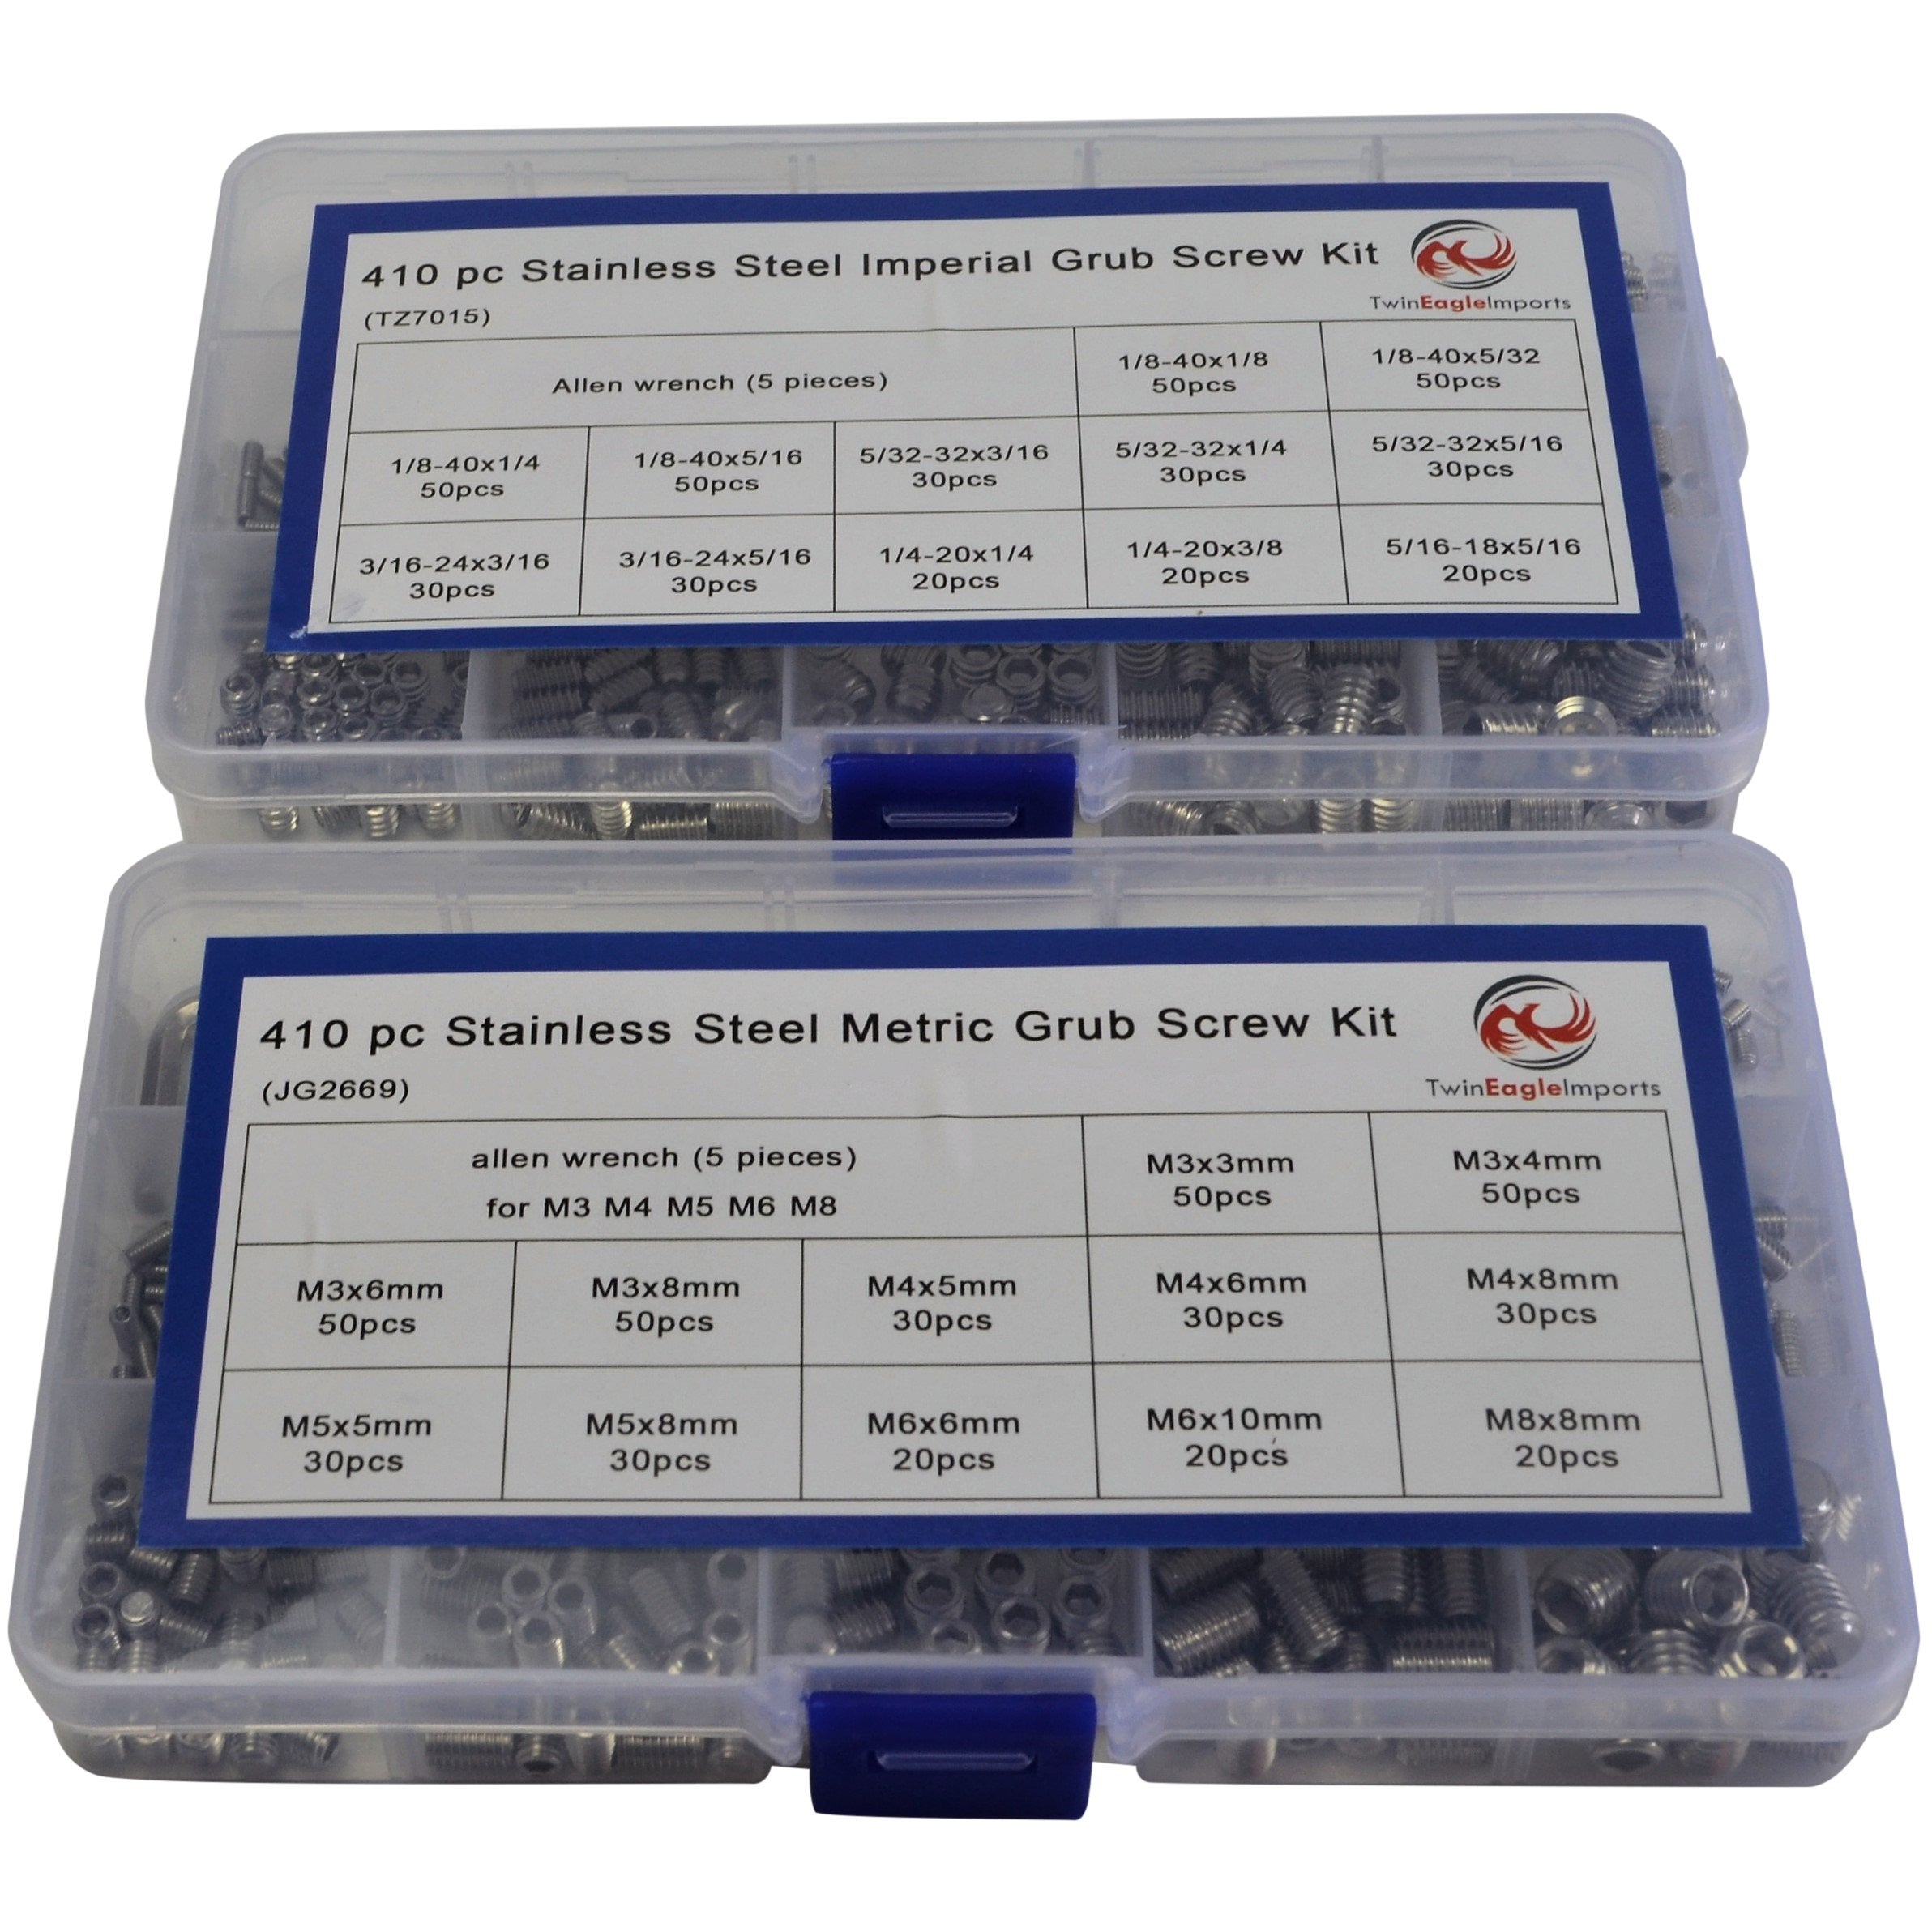 820 pc Stainless Steel Metric and Imperial Grub Set Grab Kit Assortment